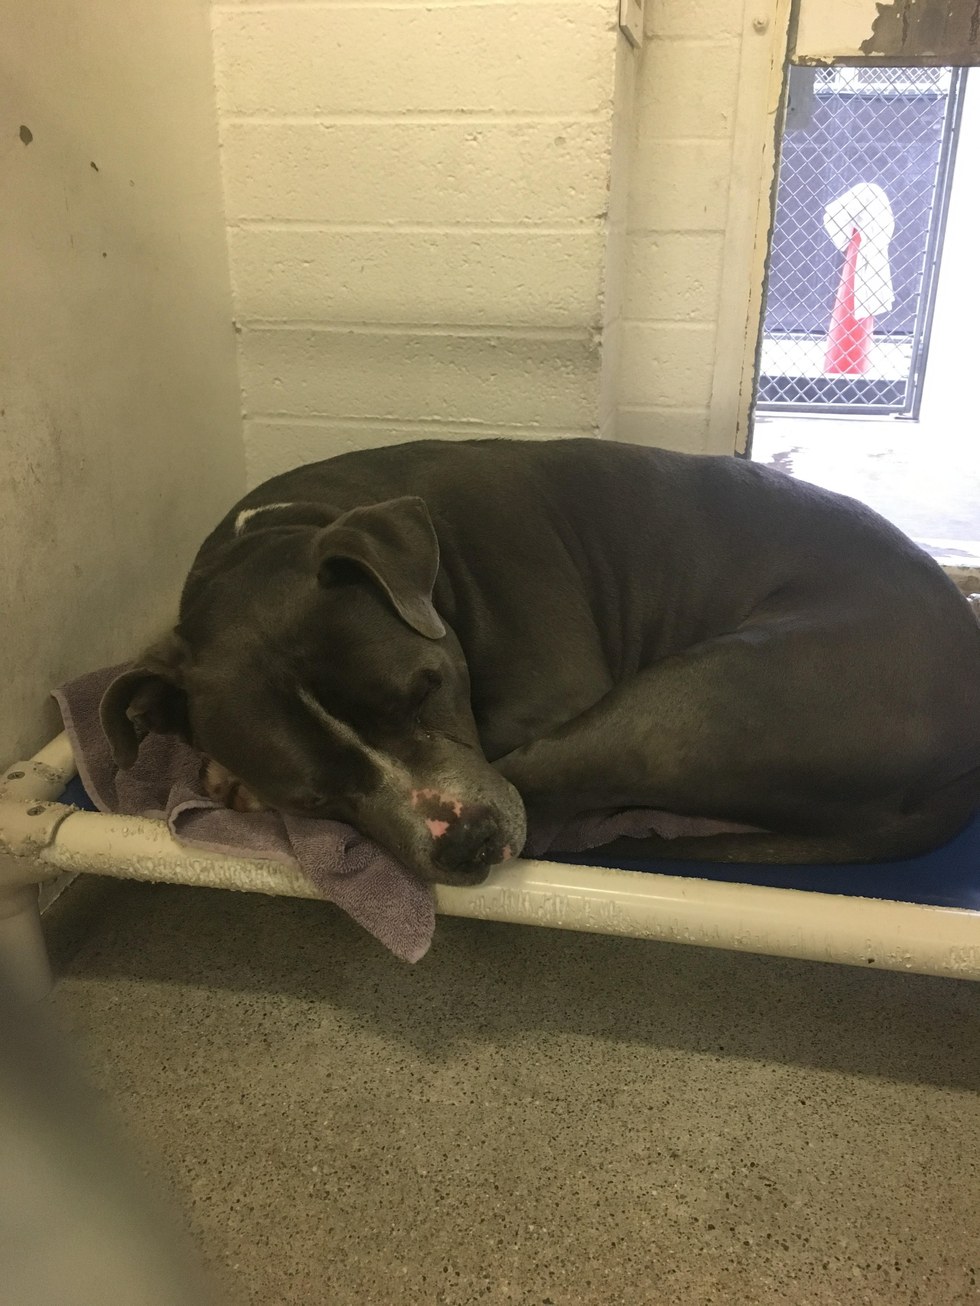 Blue King looking depressed at the animal shelter